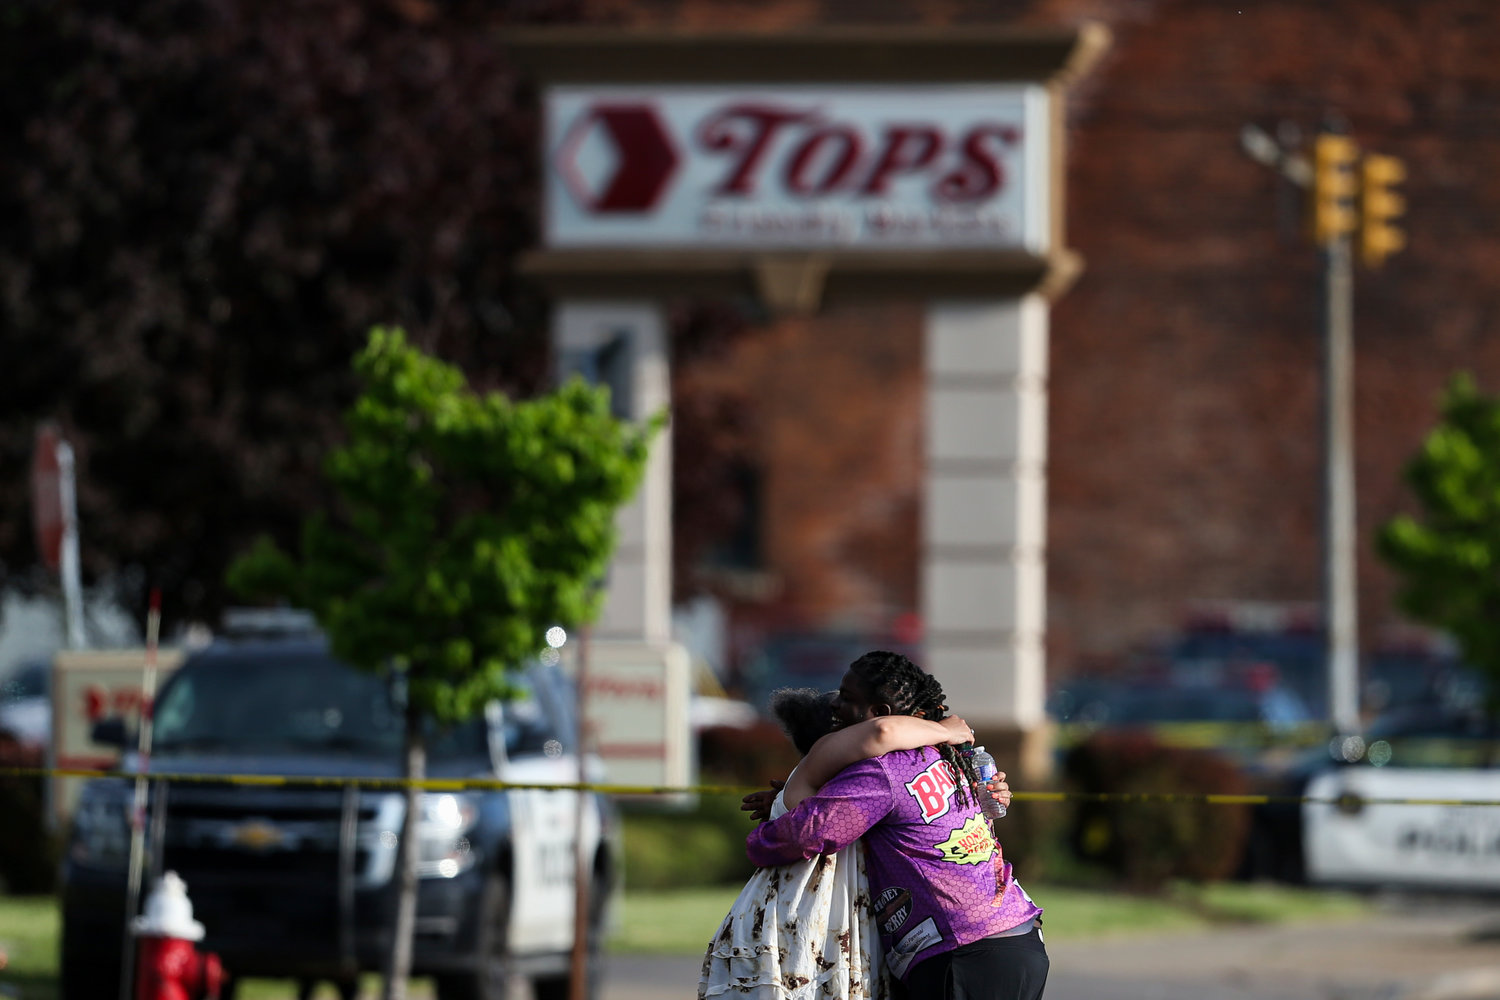 FILE - People hug outside the scene after a shooting at a supermarket on May 14, 2022, in Buffalo, N.Y.  The NAACP, the nation's oldest civil rights organization said it will propose a sweeping plan meant to protect Black Americans from white supremacist violence, in response to a hate-fueled massacre that killed 10 Black people in Buffalo, New York last weekend. (AP Photo/Joshua Bessex, File)